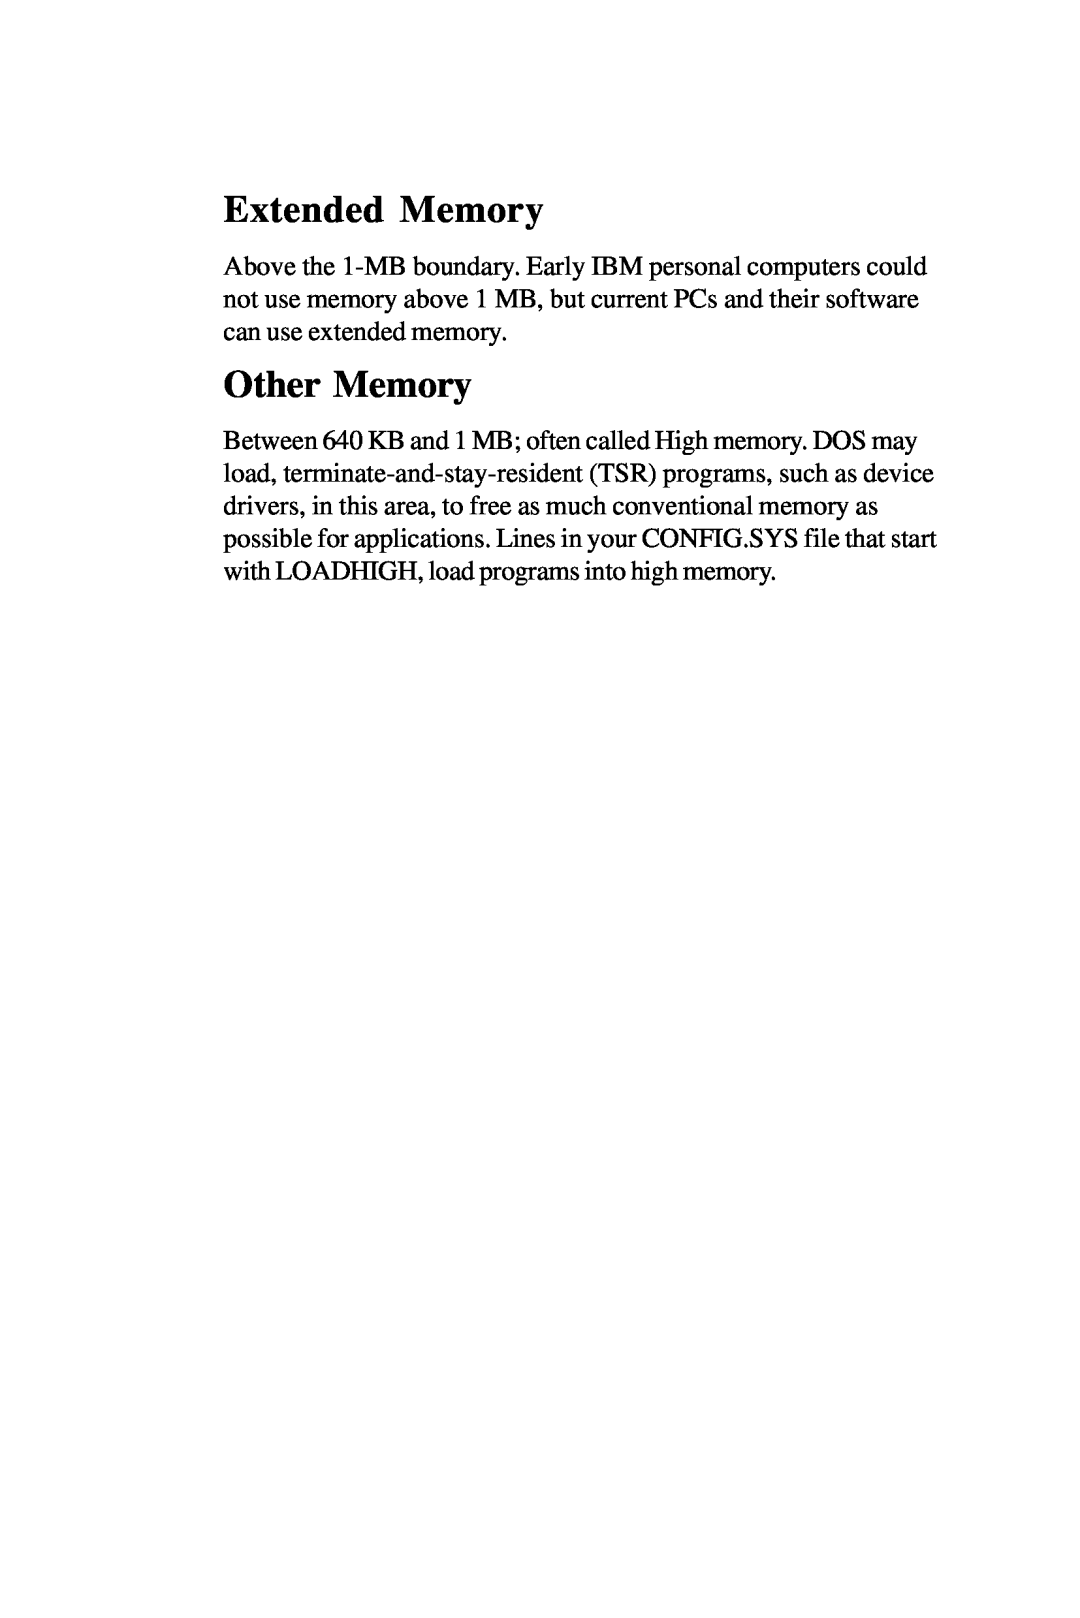 Intel PCM-6896 manual Extended Memory, Other Memory 